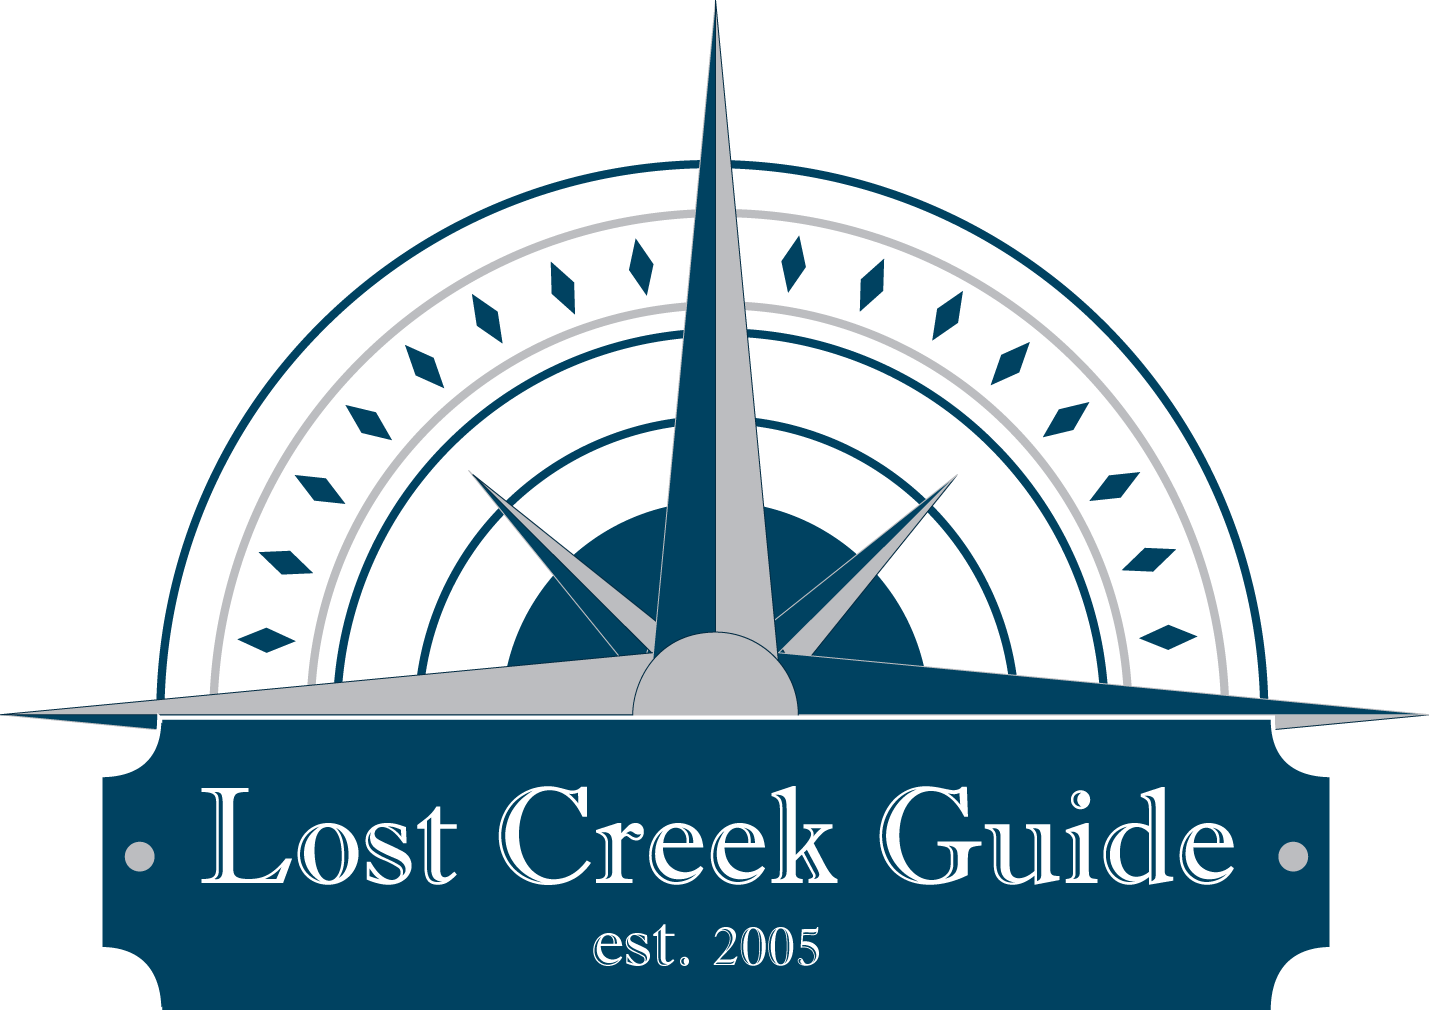 The Lost Creek Guide